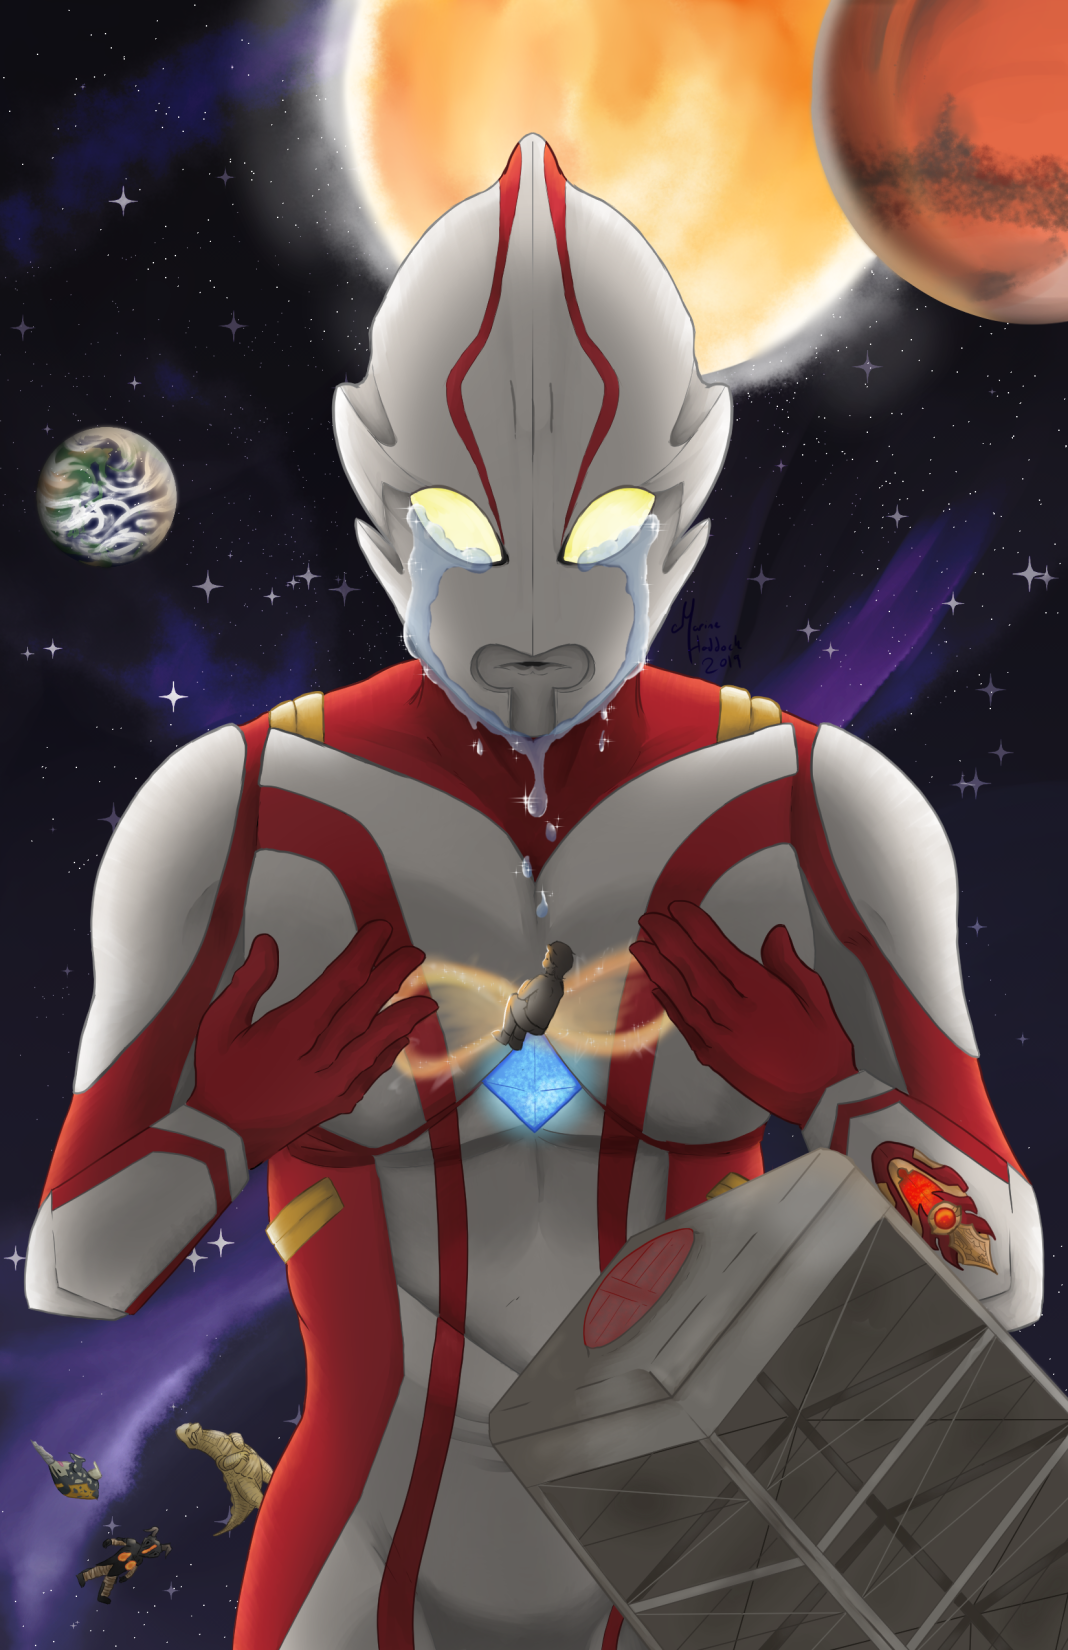 Ultraman Mebius in space as the shuttle crumbles, with Mars, Earth, and the sun behind him.  He's holding Hibino Mirai in his hands as he cries.